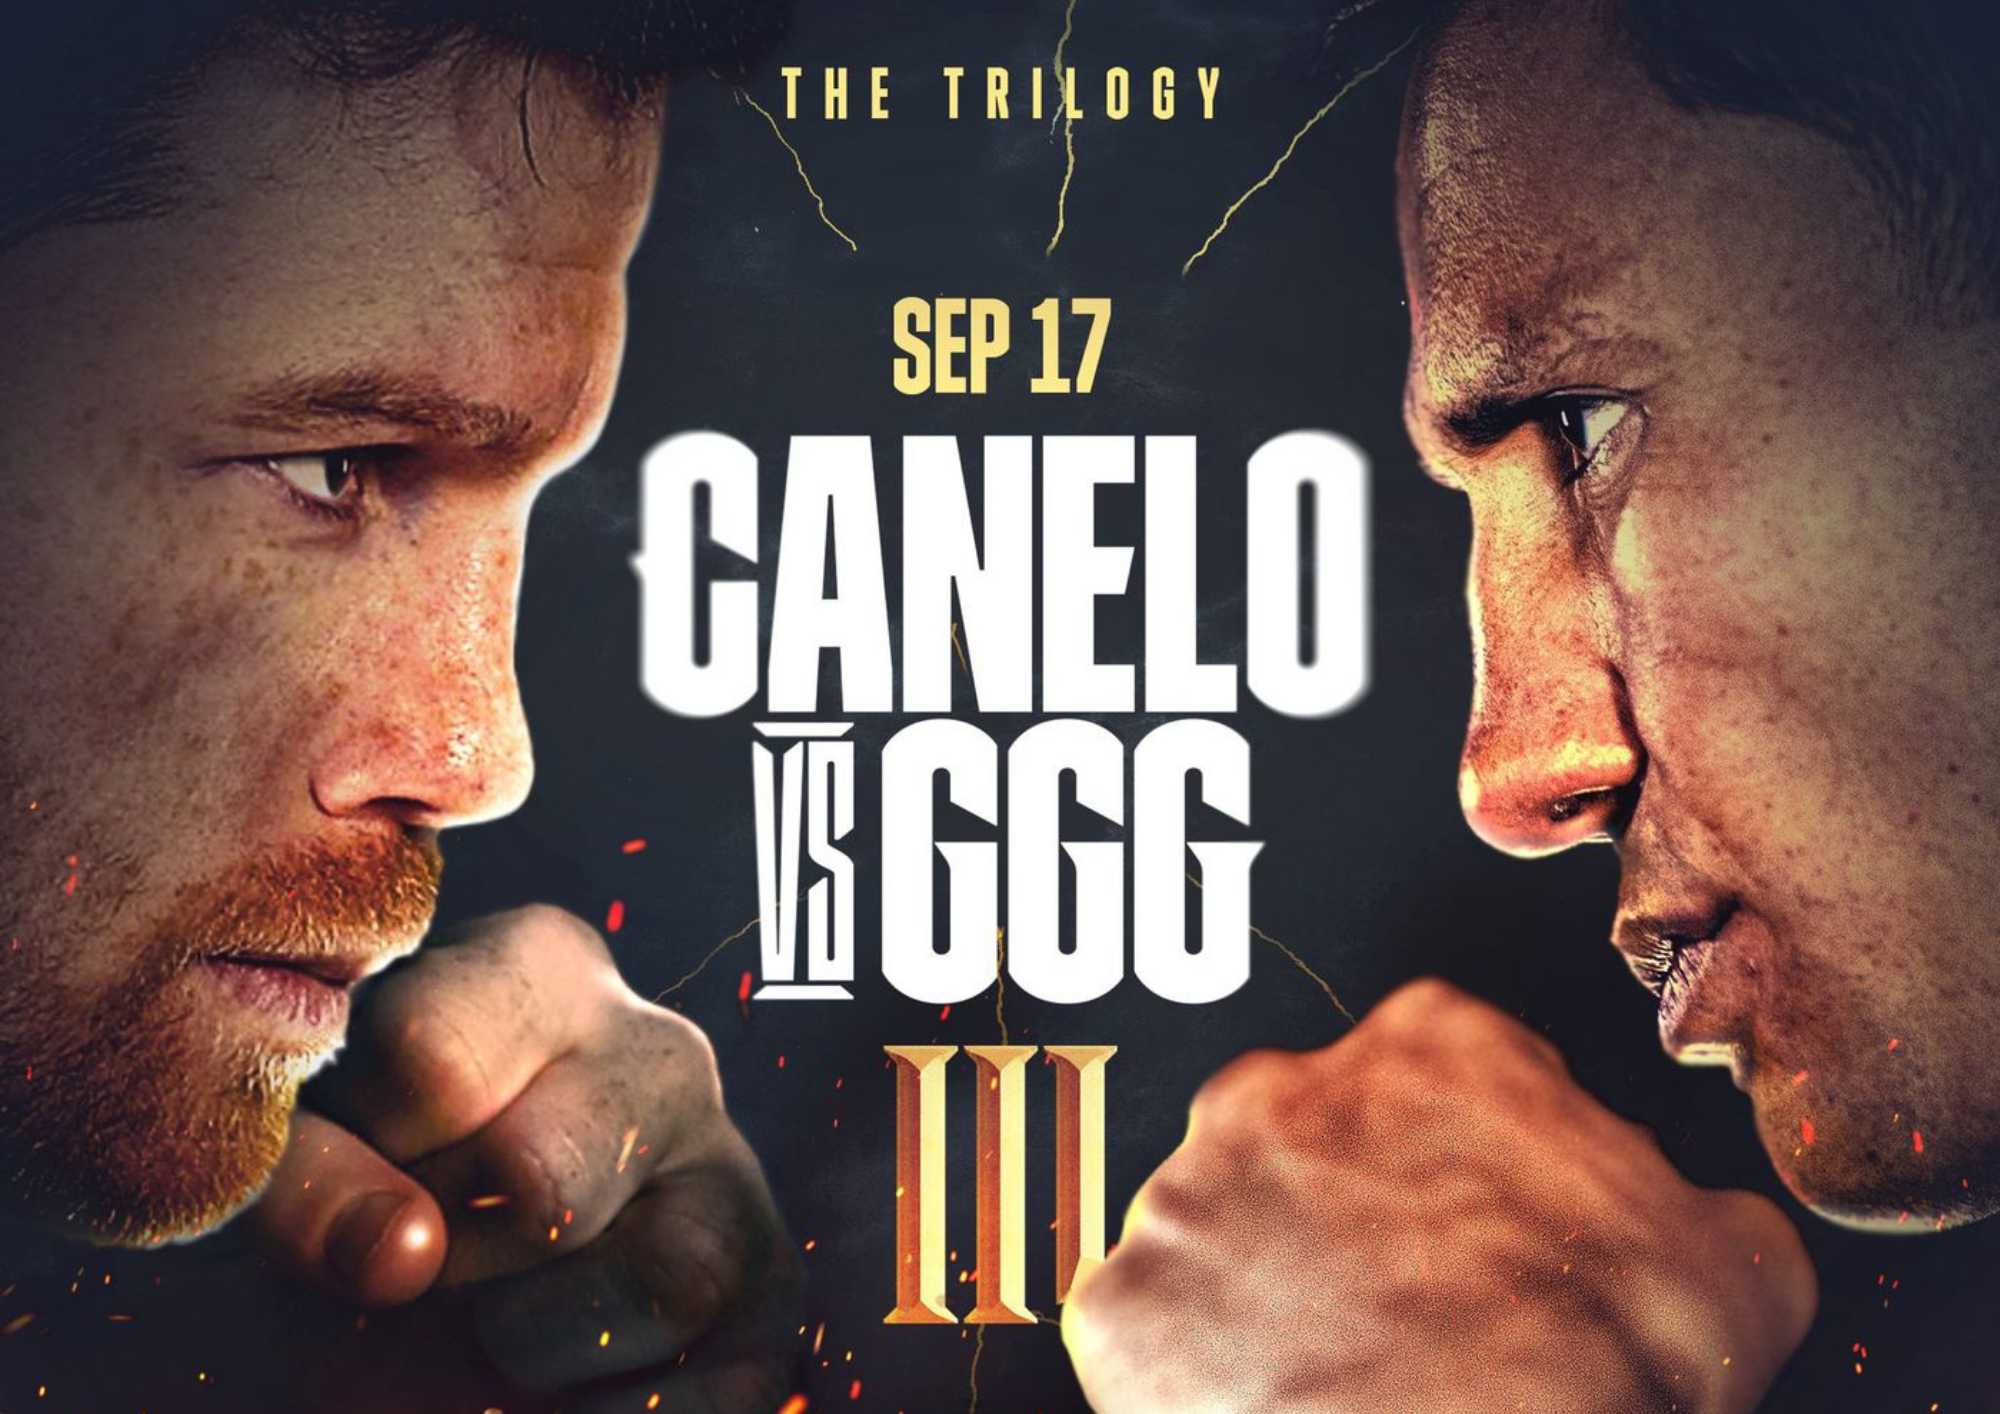 Canelo Next Fight - A Trilogy Match Against Gennady Golovkin Confirmed For 2022